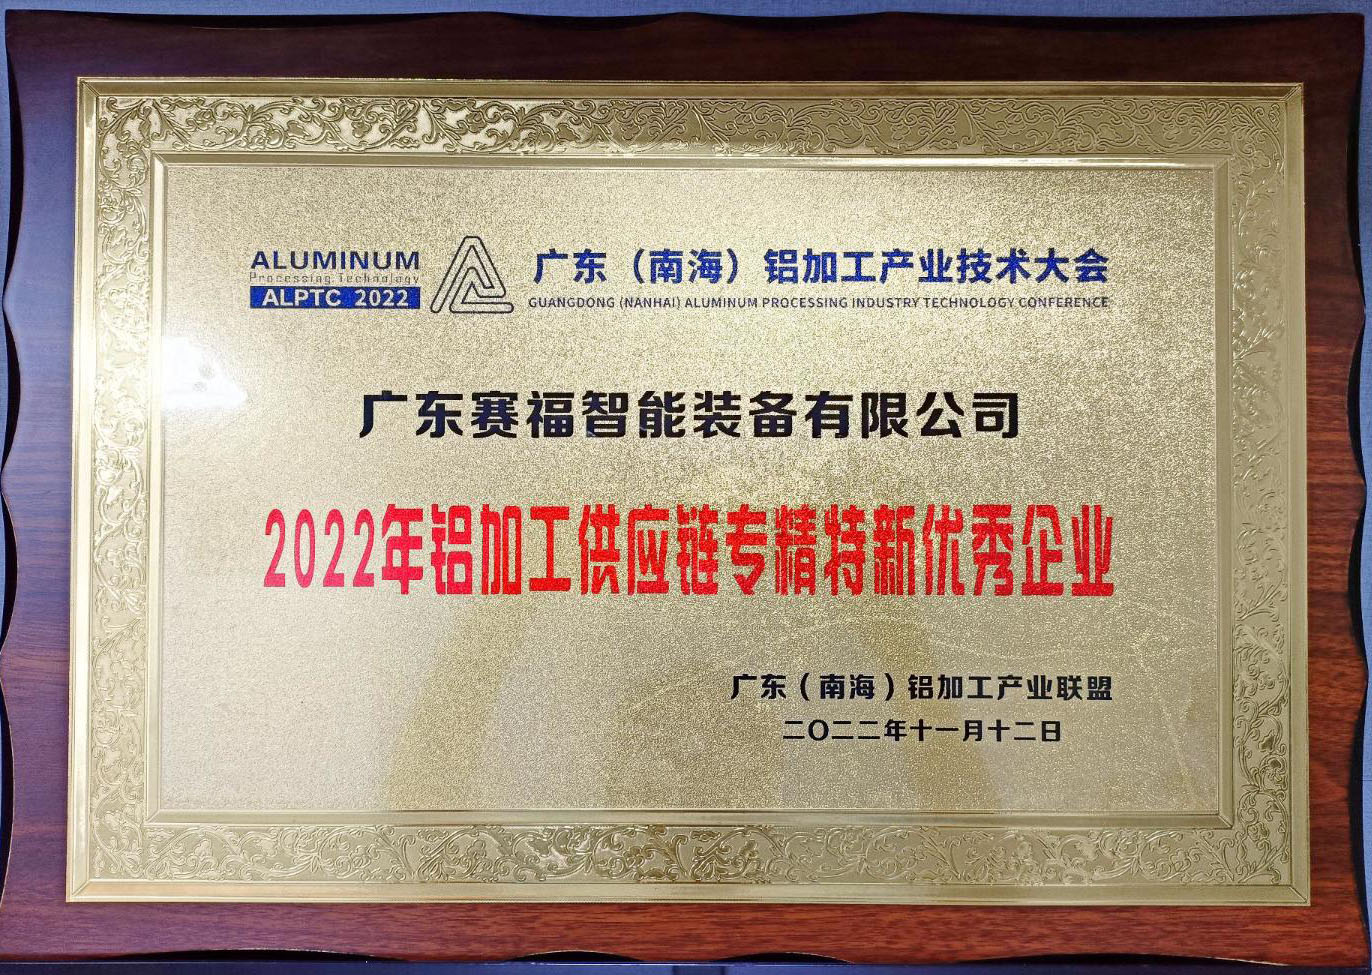 2022 aluminum processing supply chain specializing in new excellent enterprises